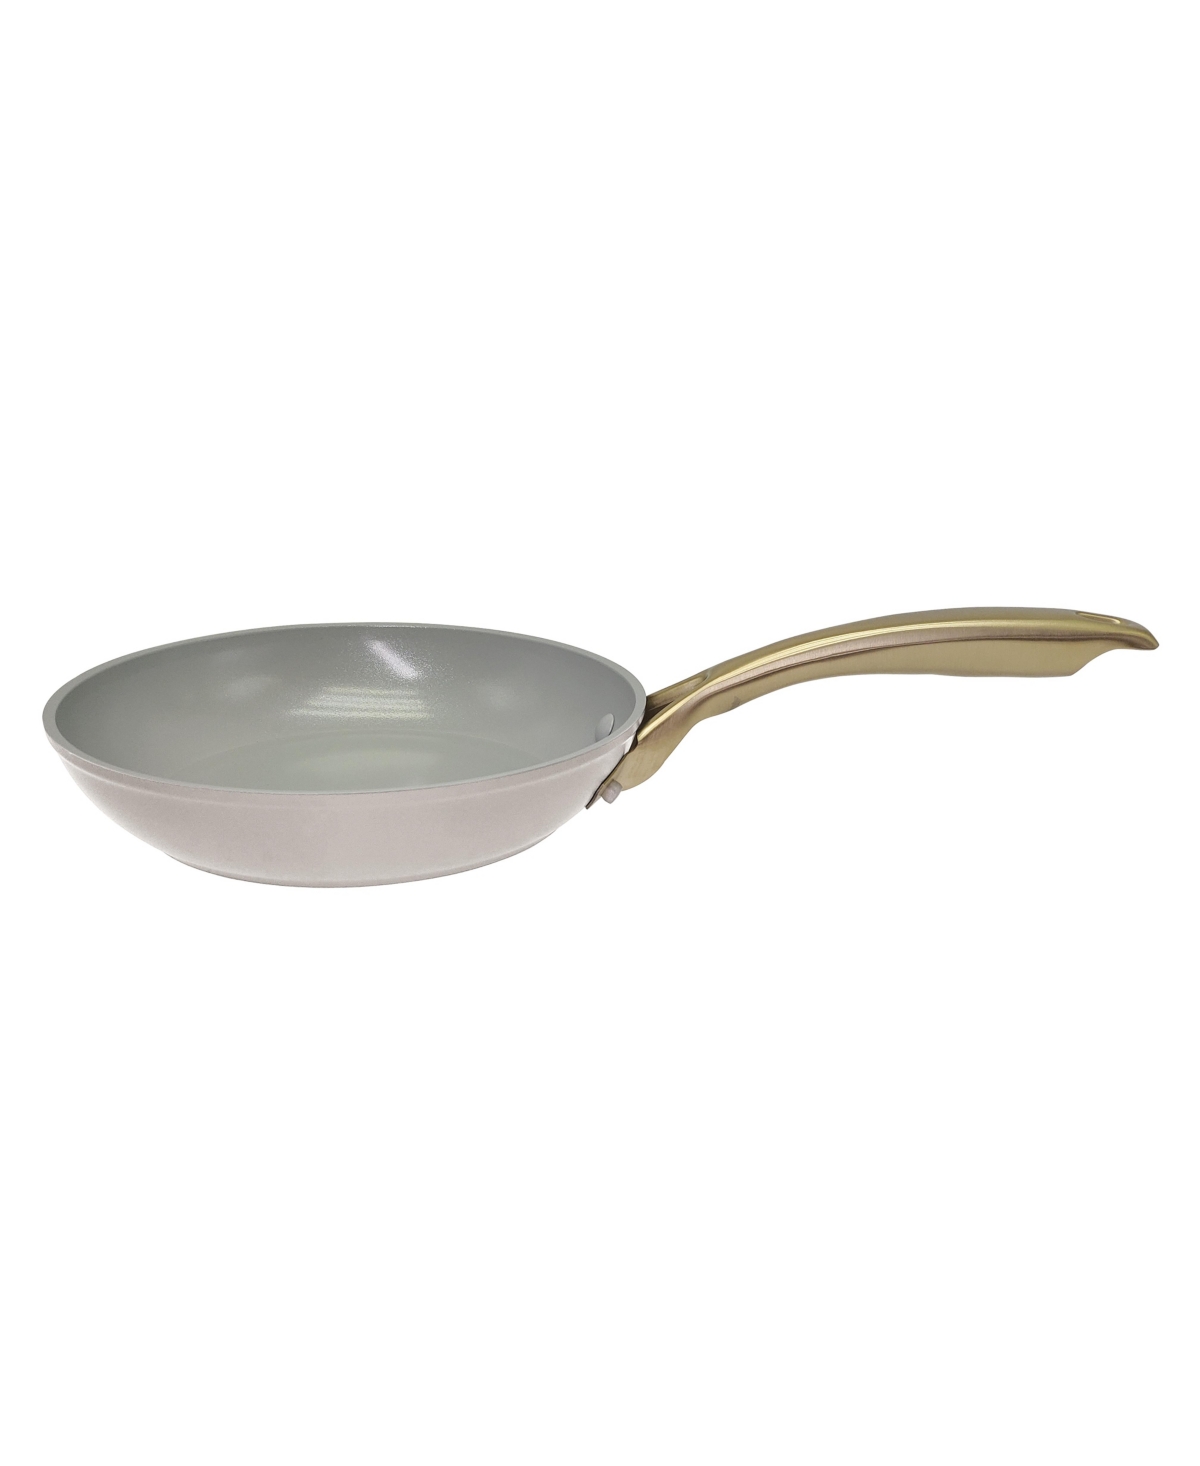 Sedona Ceramic 8" Forged Fry Pan In Ivory